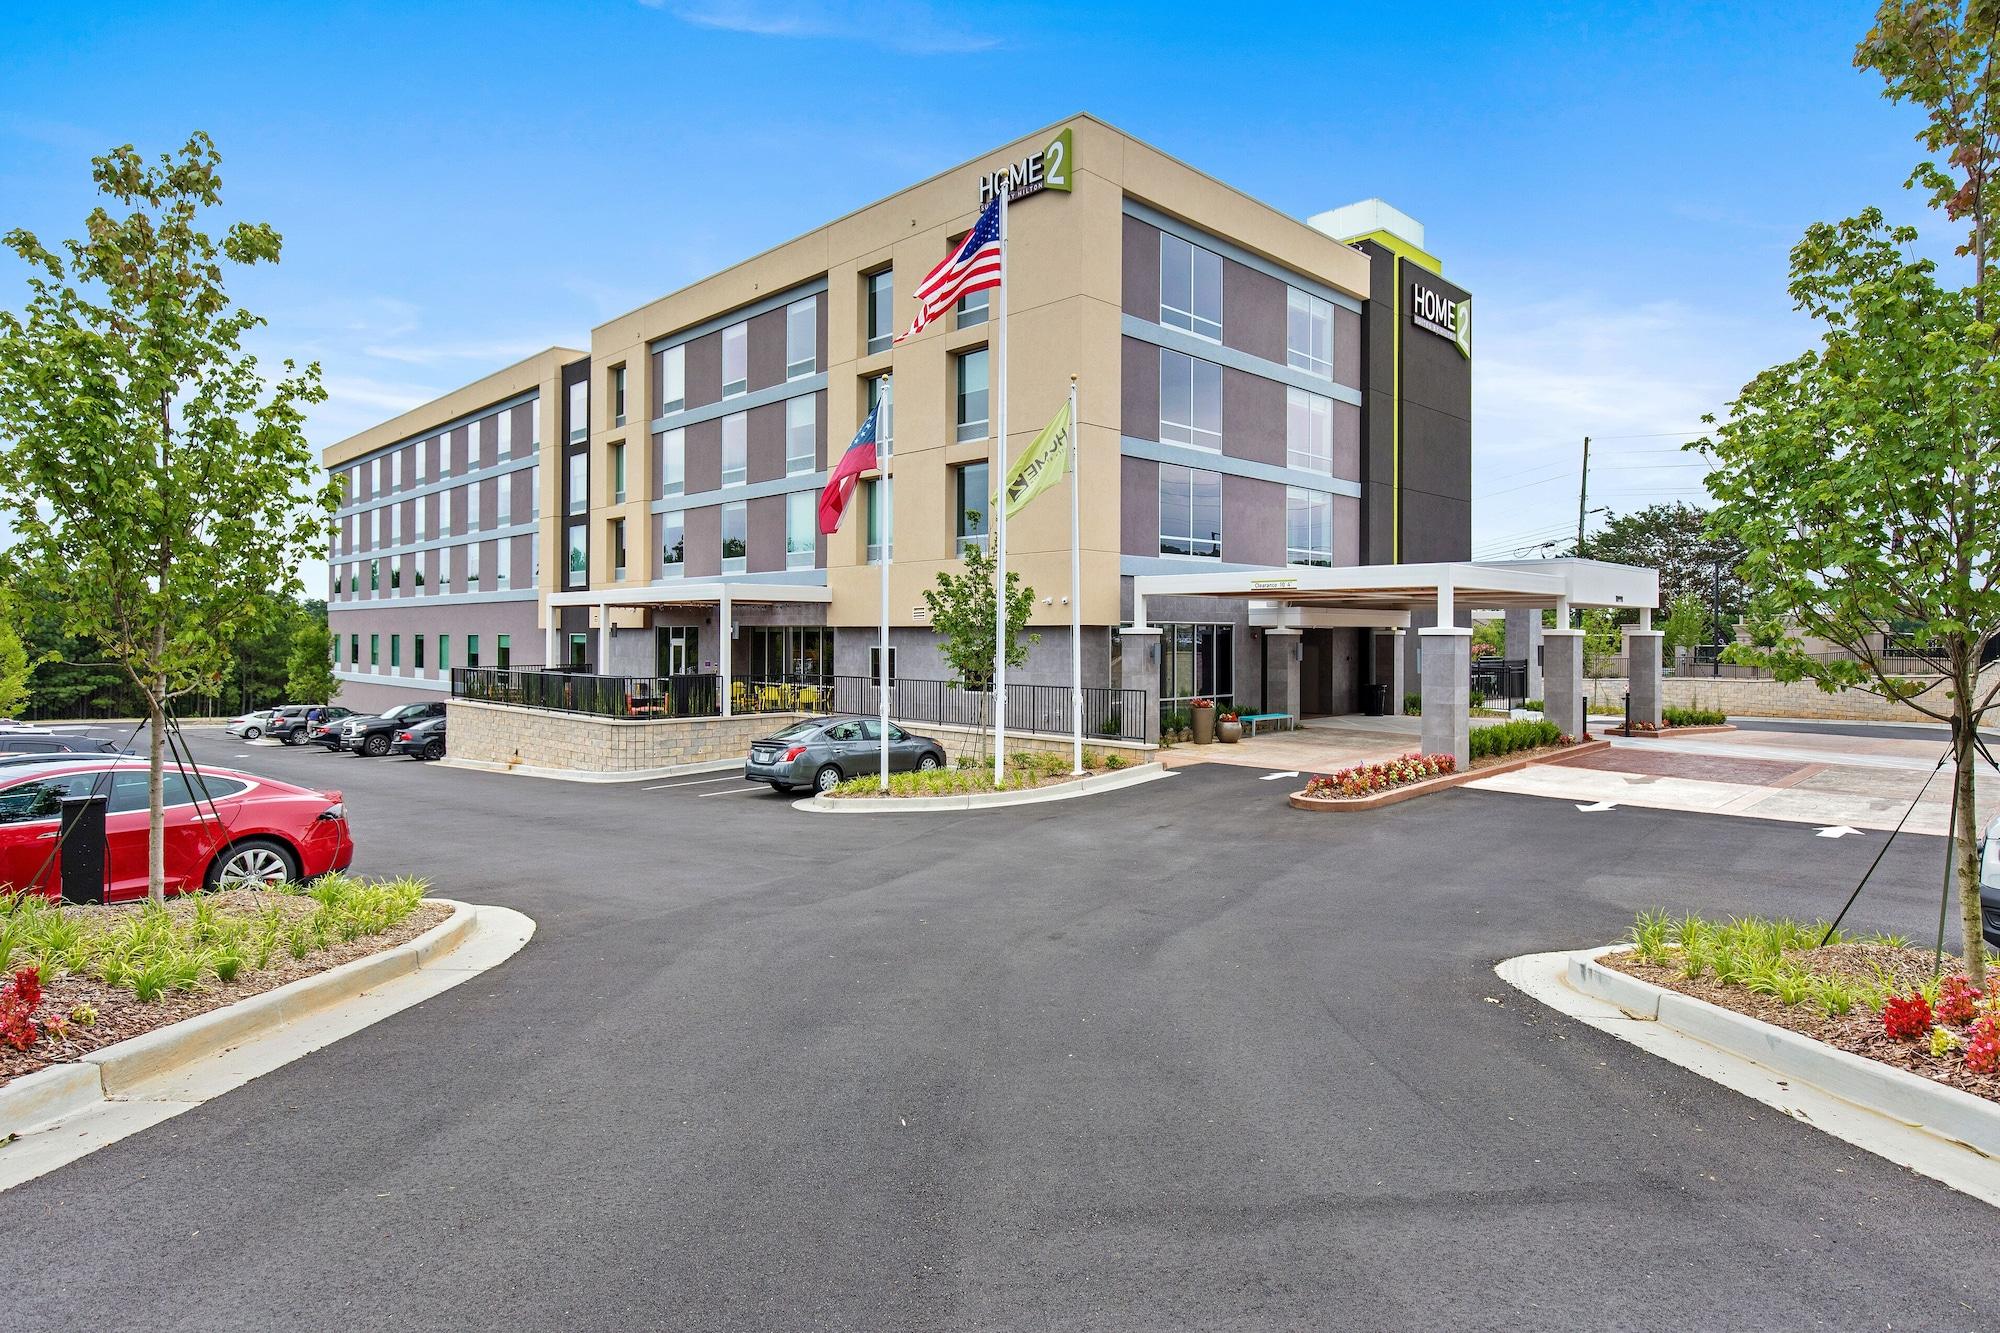 Home2 Suites by Hilton Roswell, GA image